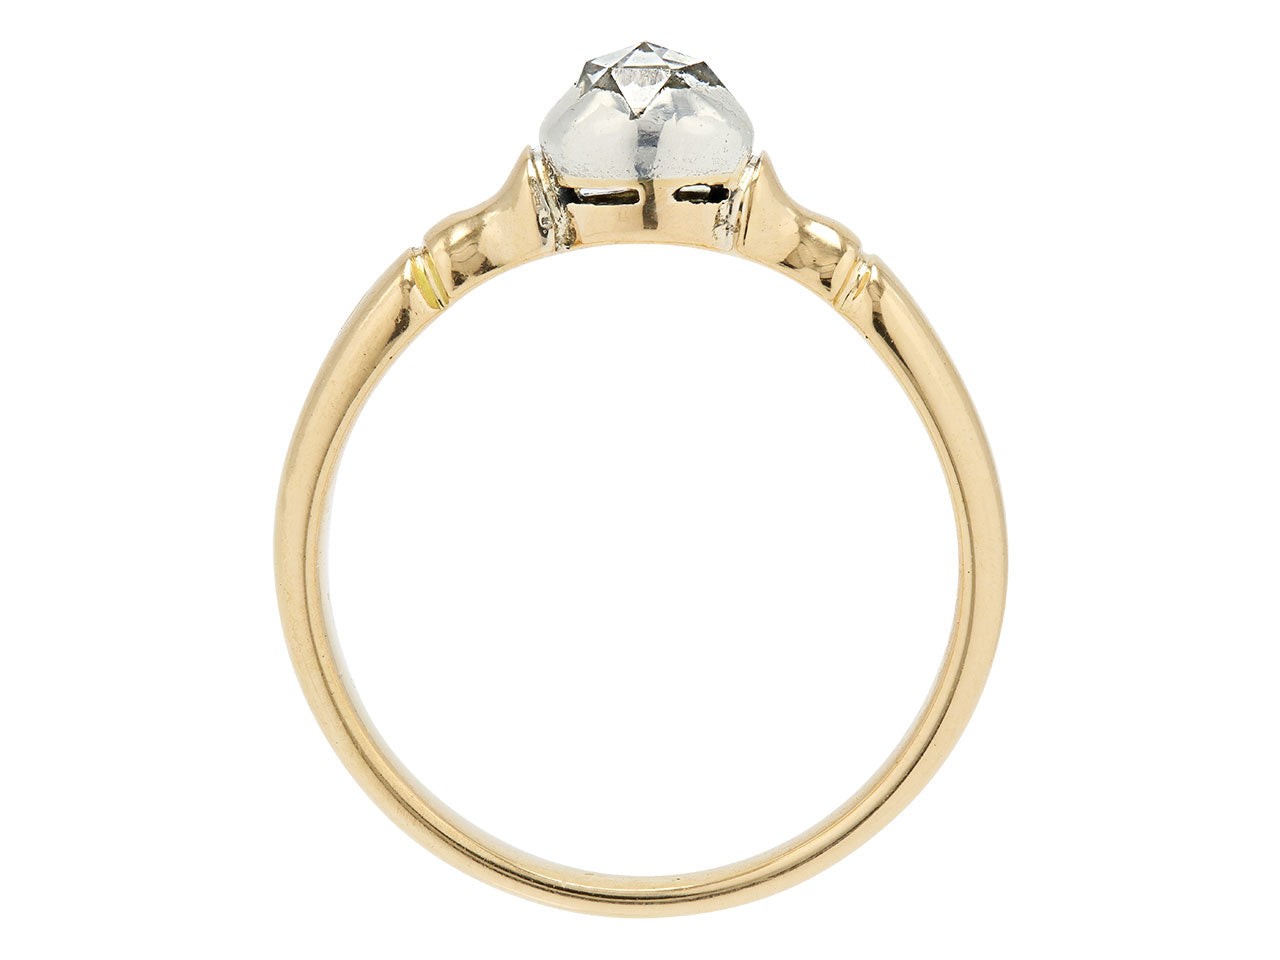 Antique Diamond Ring in 14K Gold and Silver